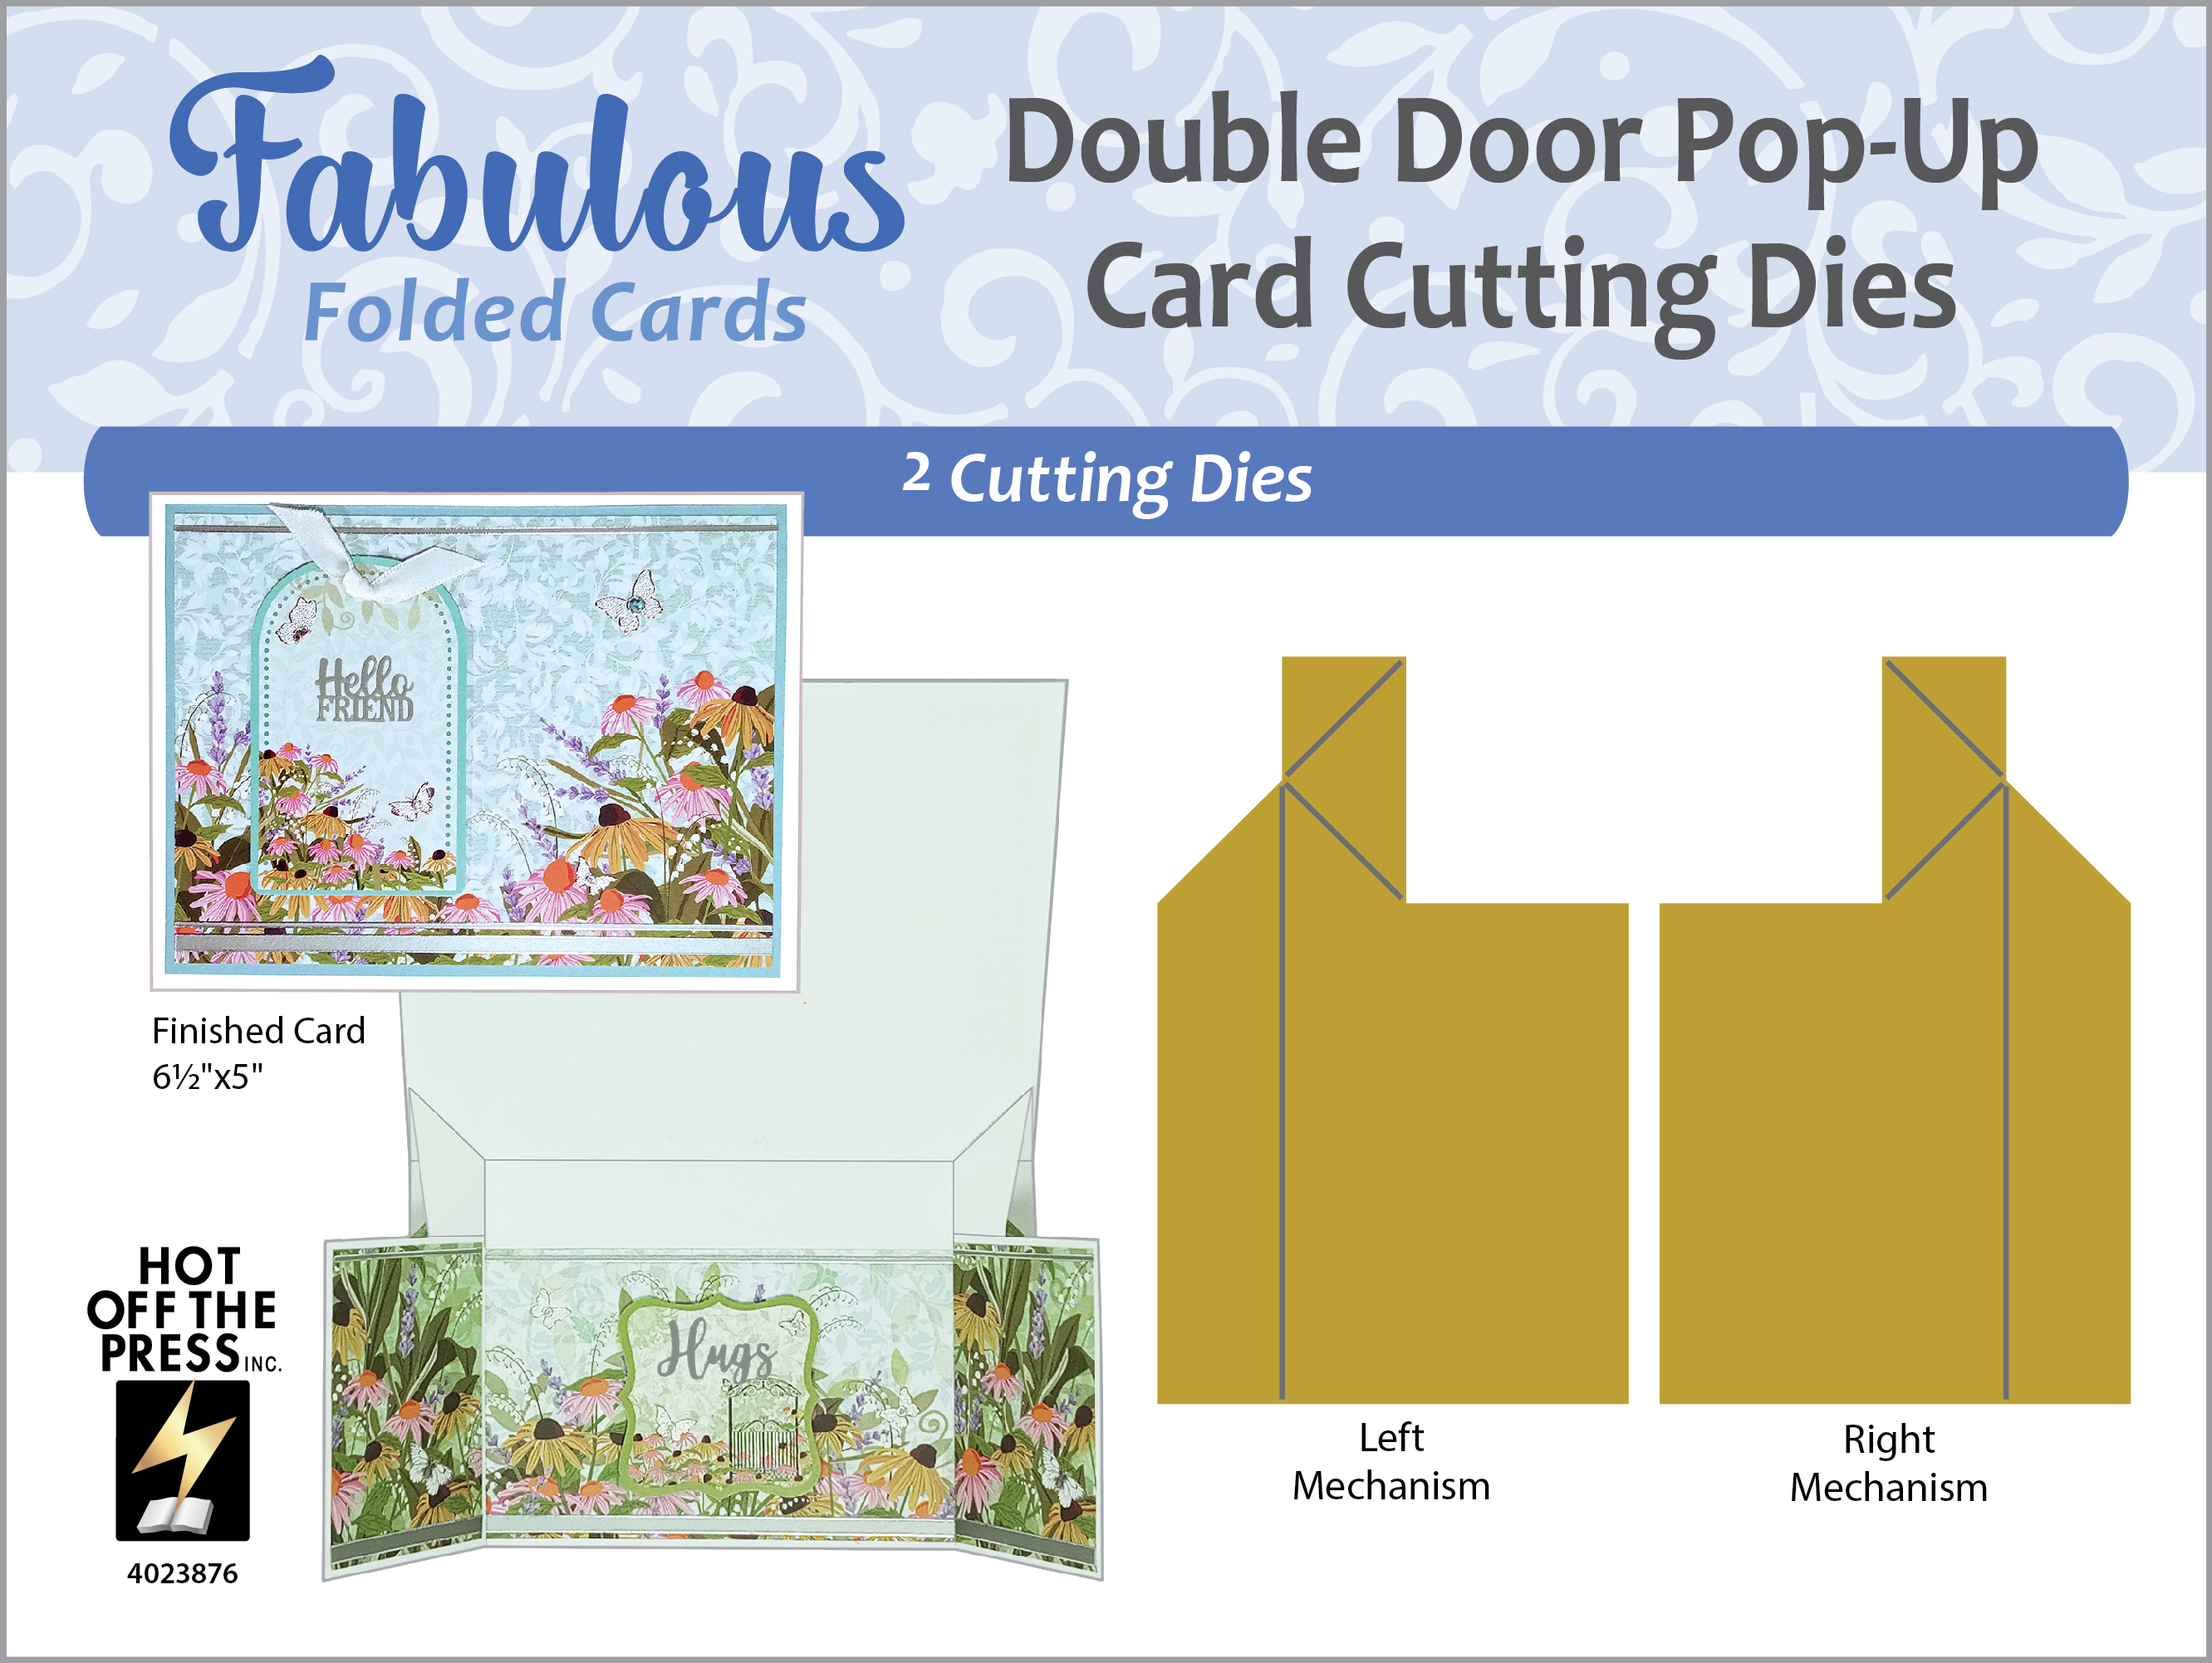 Double Door Pop-Up Card Dies by Fabulous Folded Cards